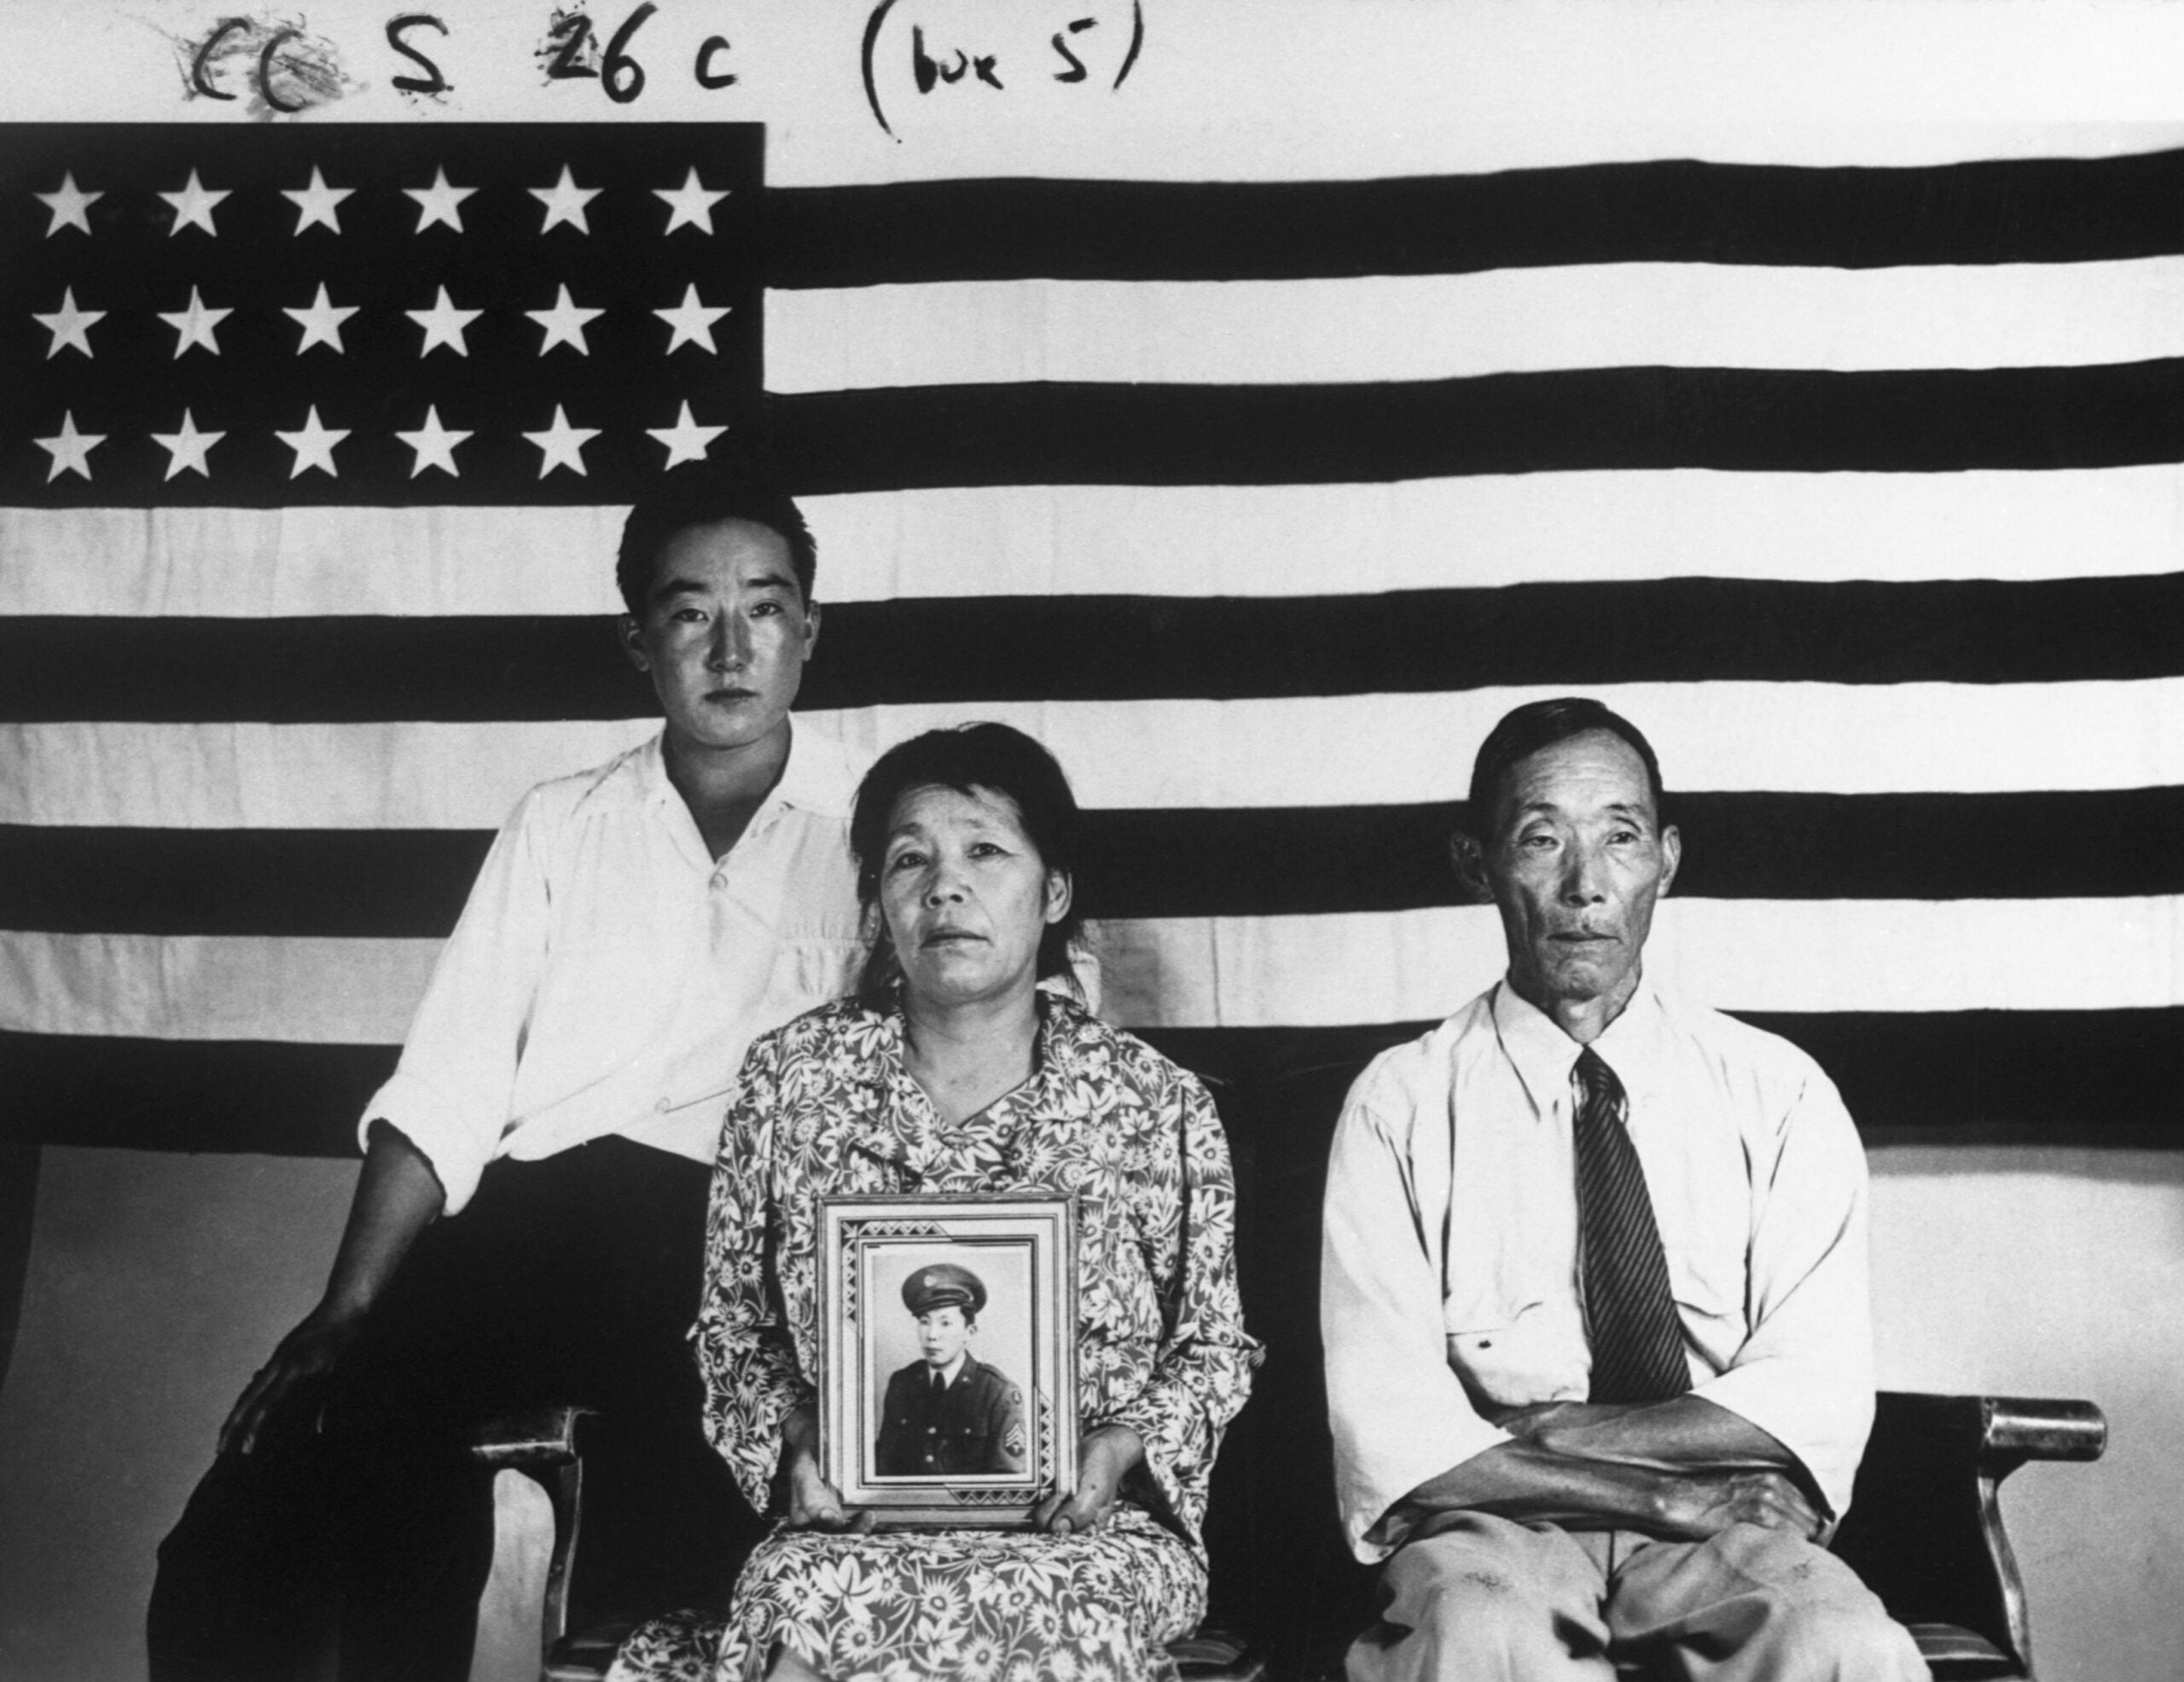 The unlawful detention of Asian Americans during World War II remains disturbingly relevant